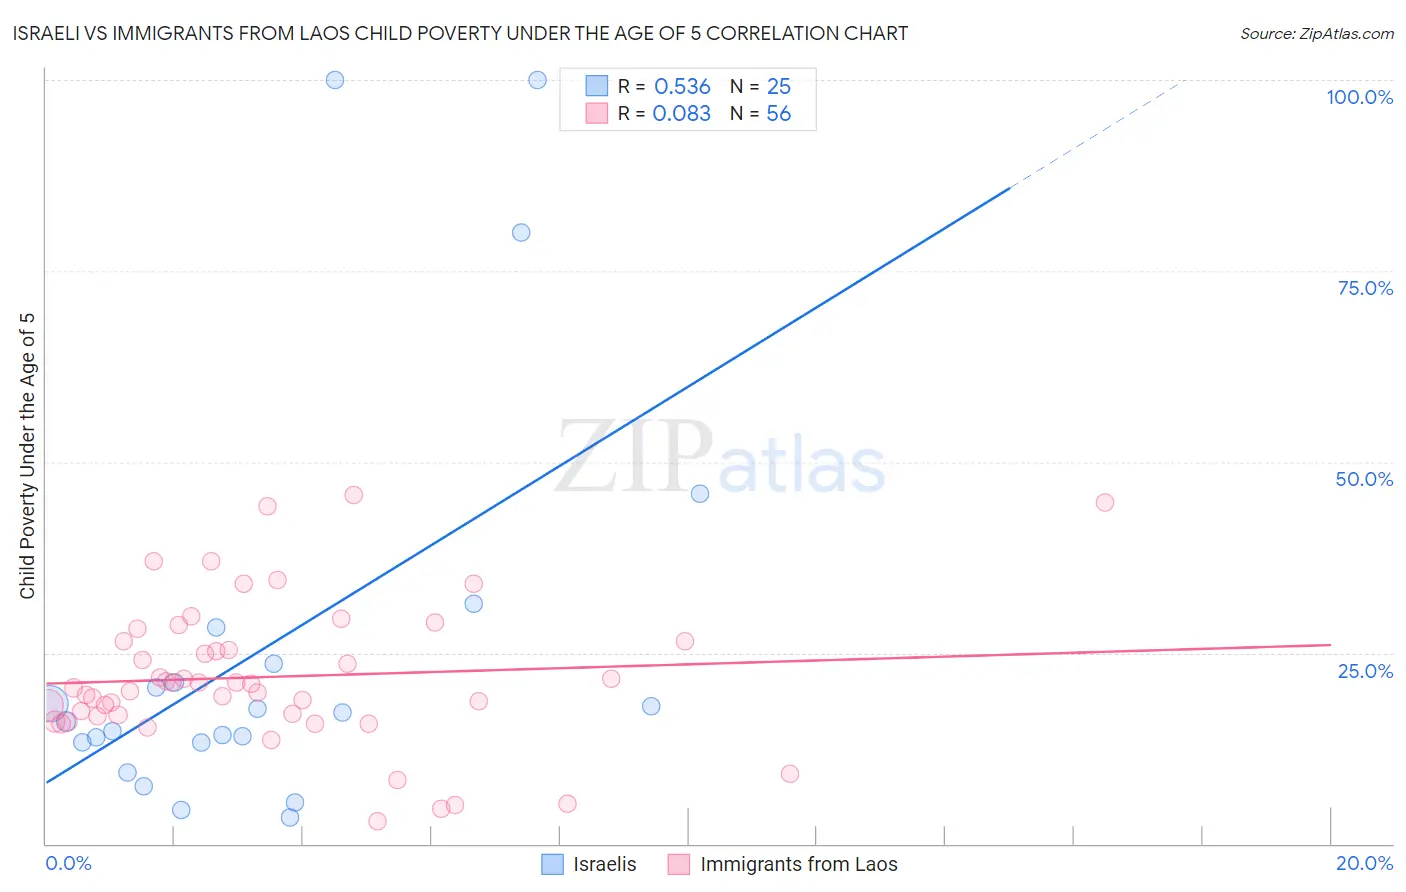 Israeli vs Immigrants from Laos Child Poverty Under the Age of 5